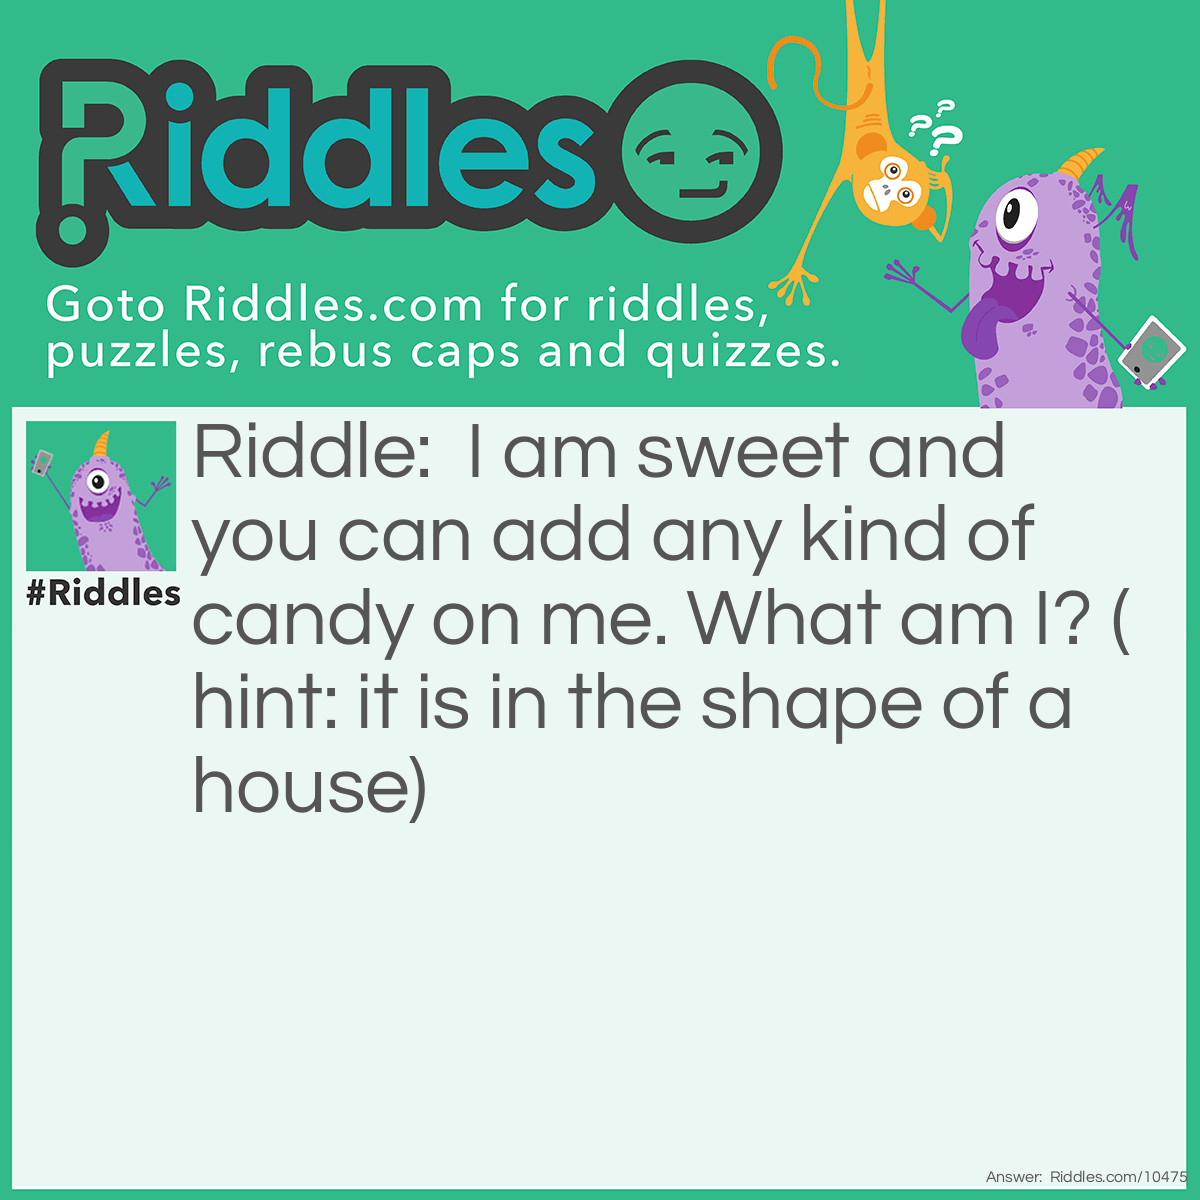 Riddle: I am sweet and you can add any kind of candy on me. What am I? (hint: it is in the shape of a house) Answer: A gingerbread house.